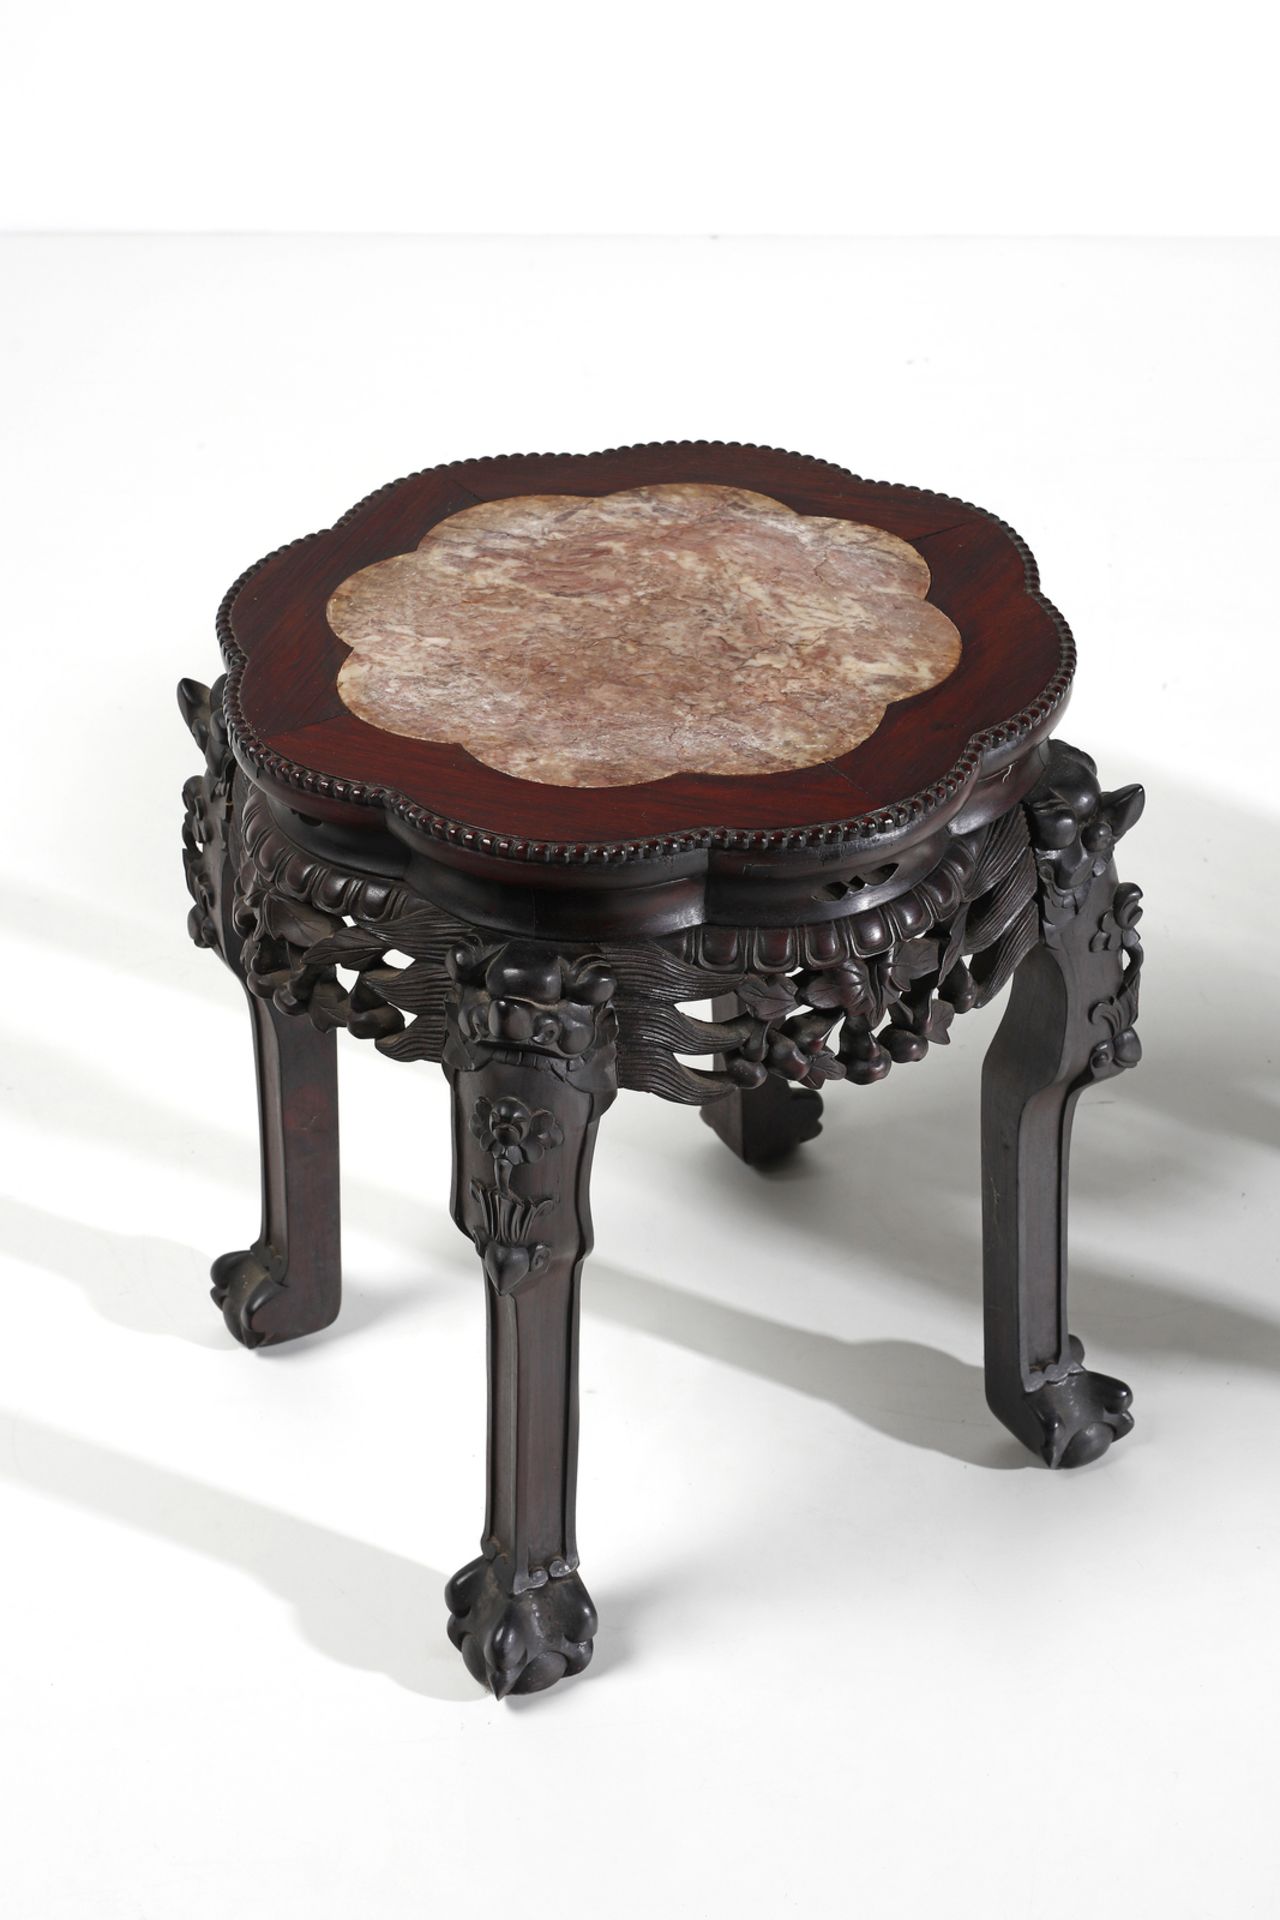 Arte Cinese  A pair of wooden stools with pink marble top China, Qing dynasty, 19th century . - Bild 2 aus 7